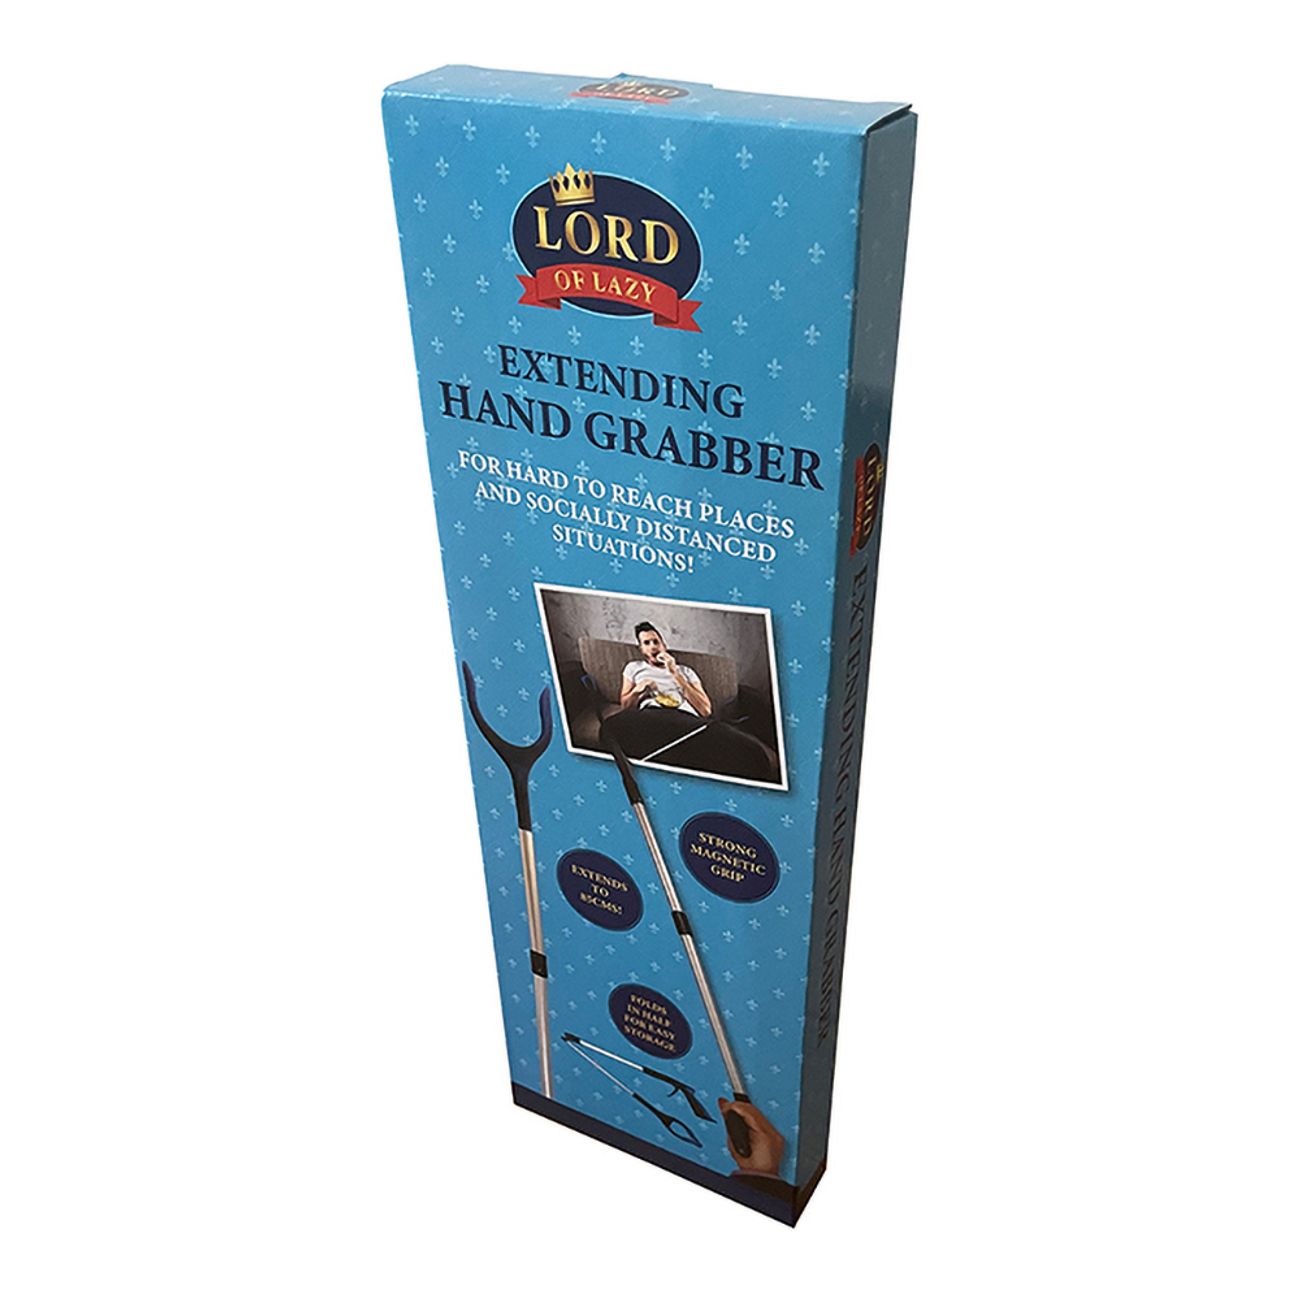 lord-of-lazy-hand-grabber-81175-1